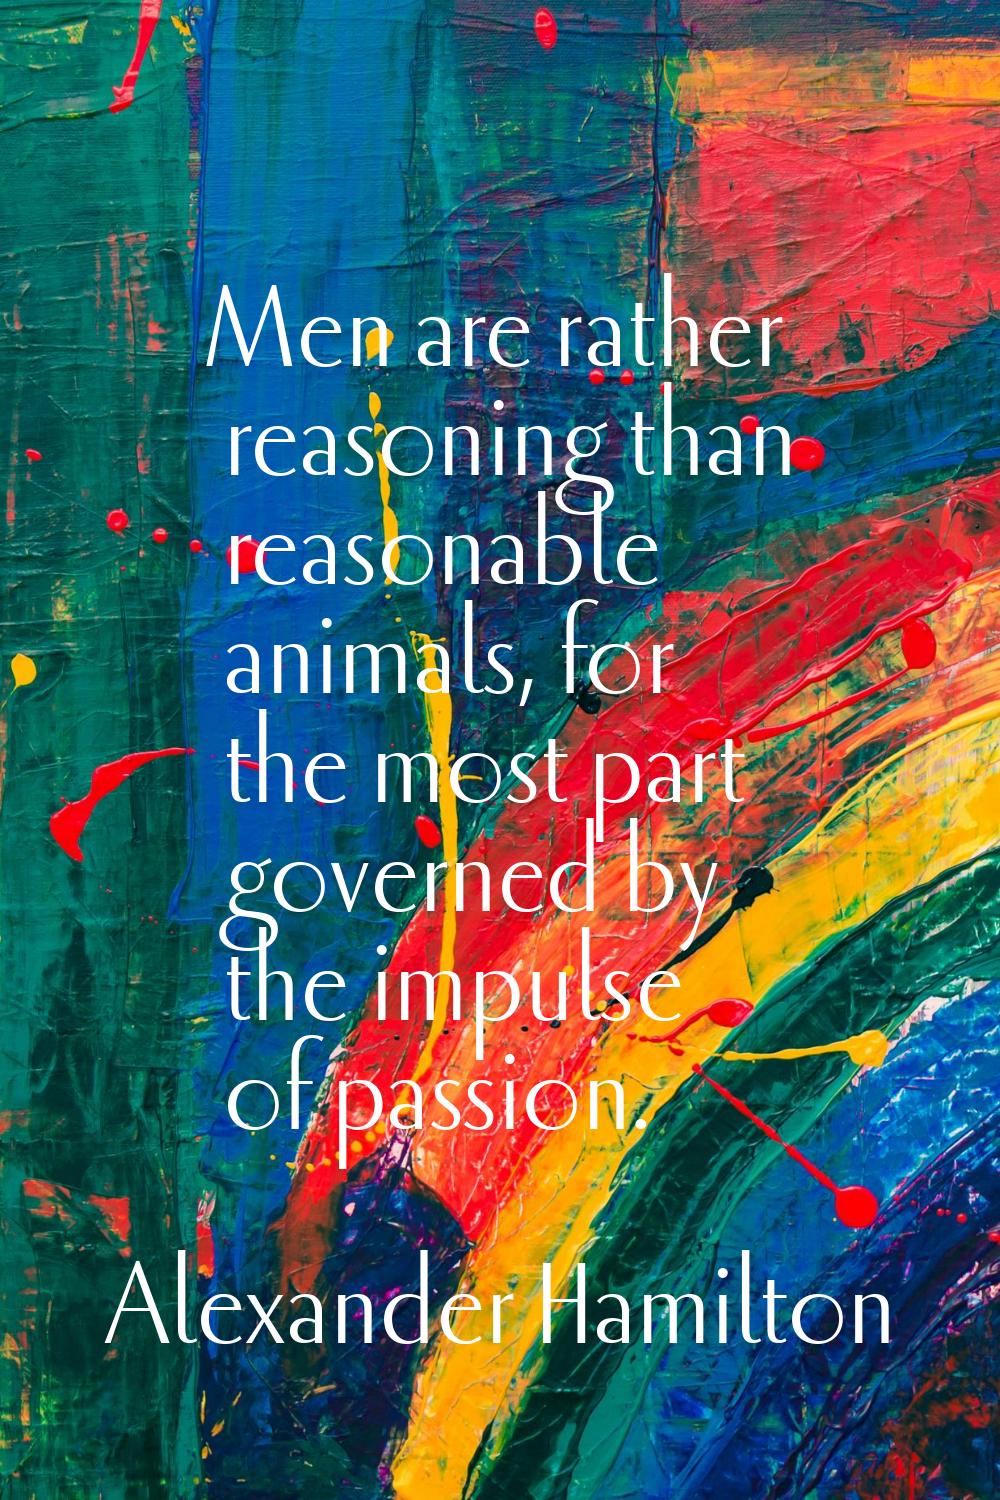 Men are rather reasoning than reasonable animals, for the most part governed by the impulse of pass